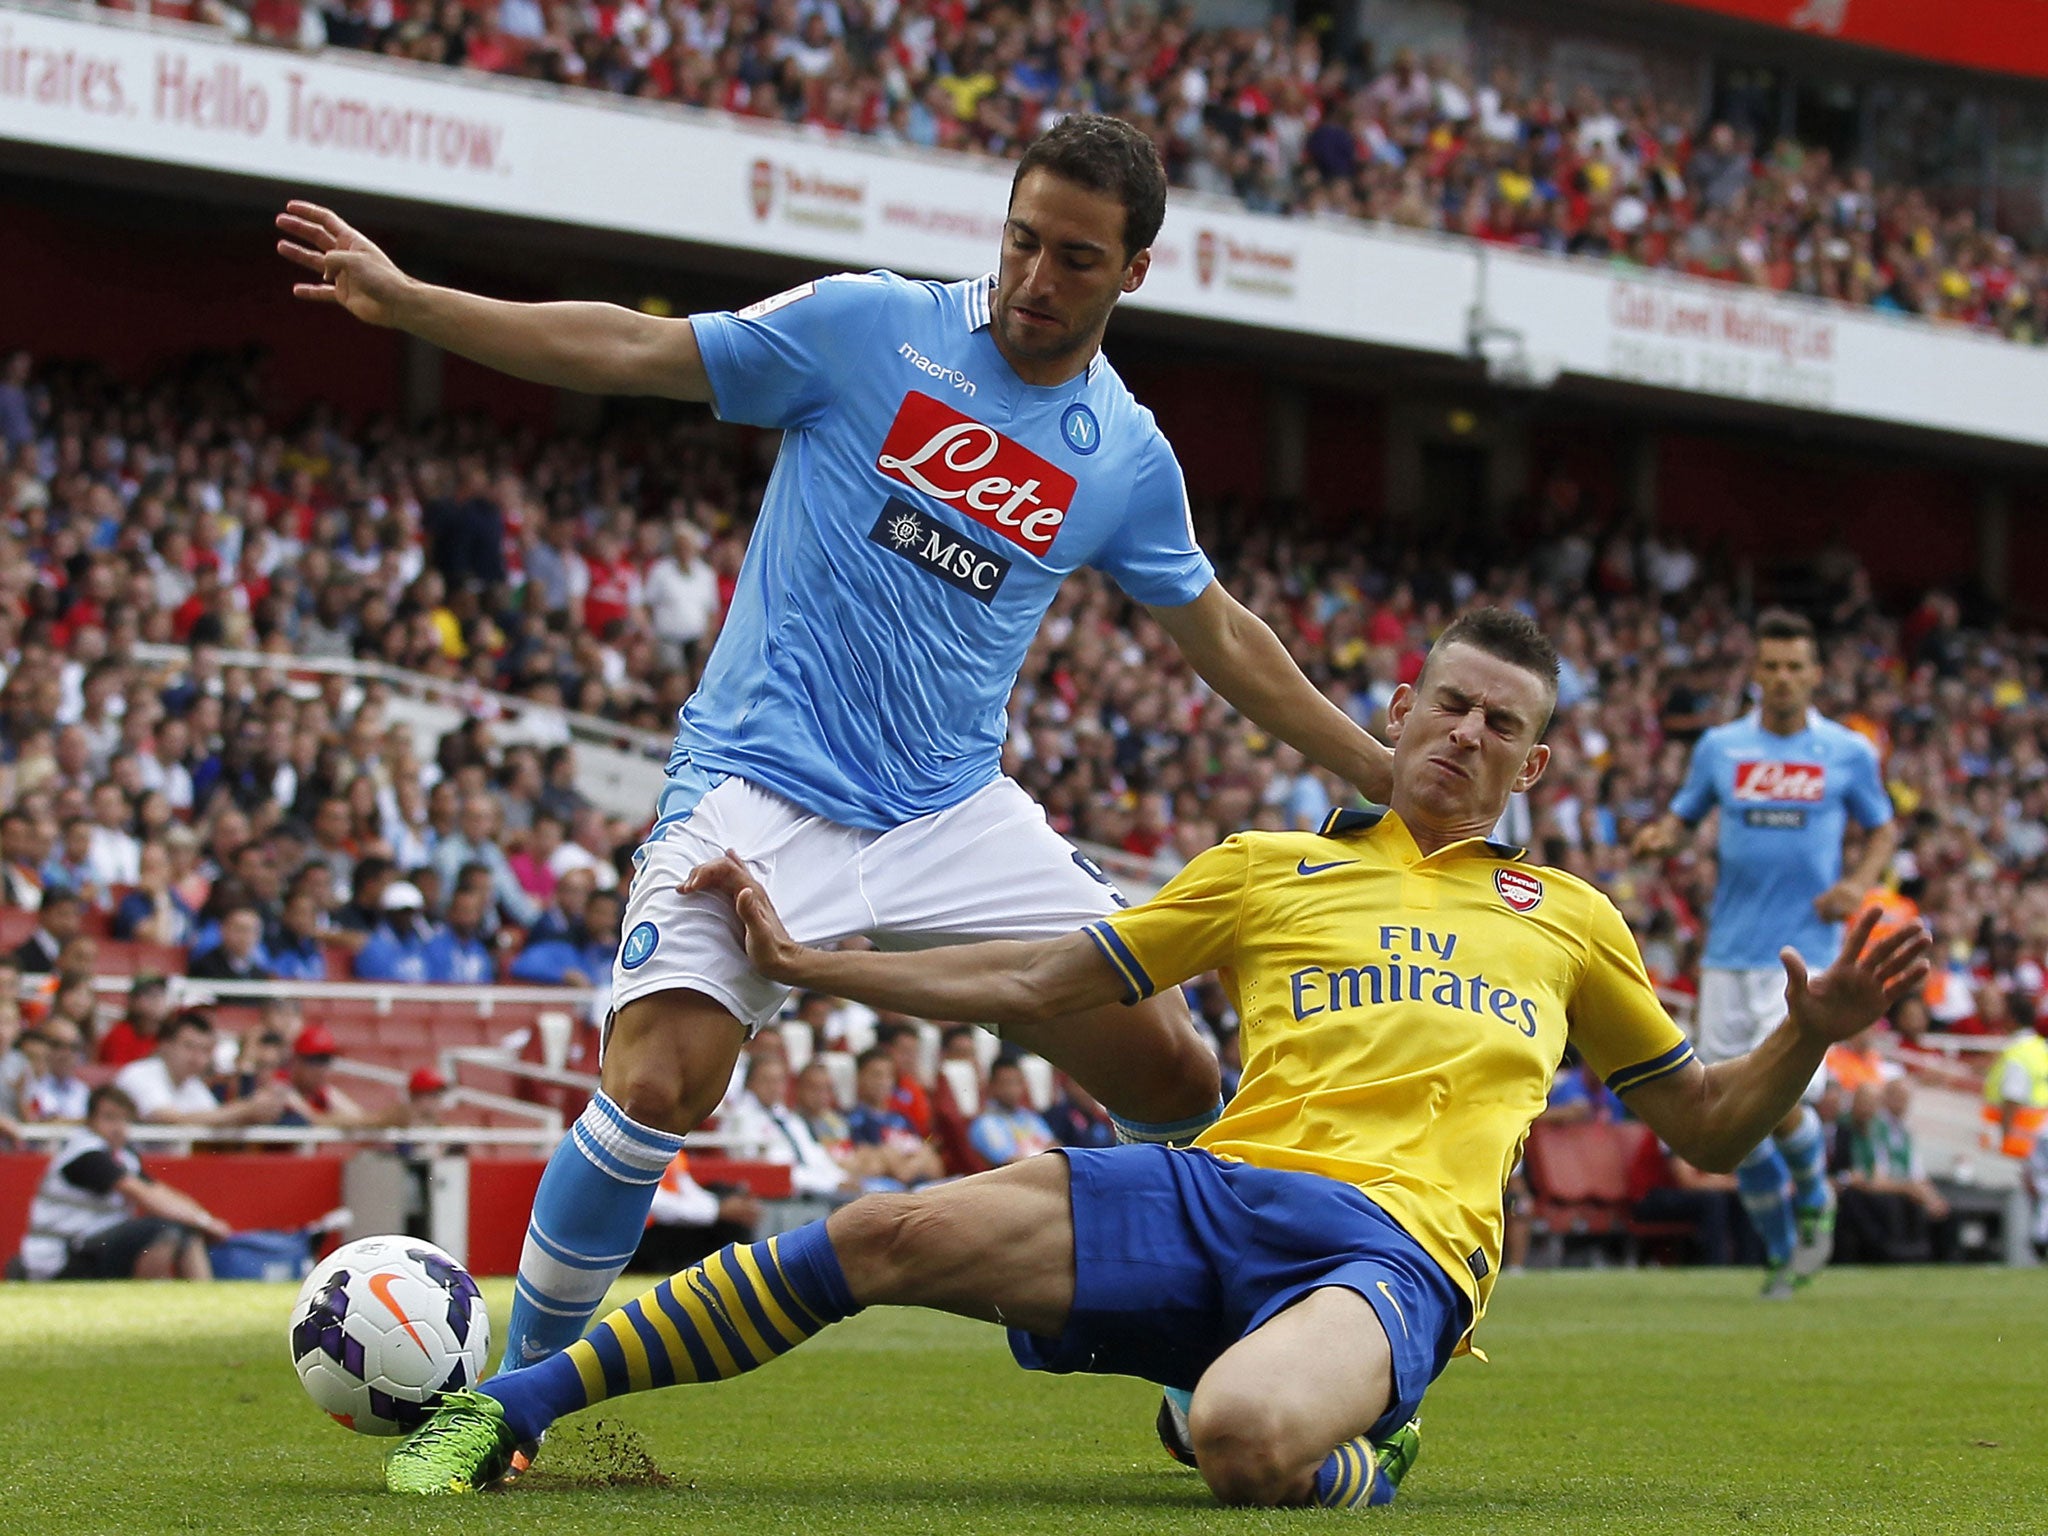 Gonzalo Higuain, in action for Napoli against Arsenal, is one of Italy's few imports